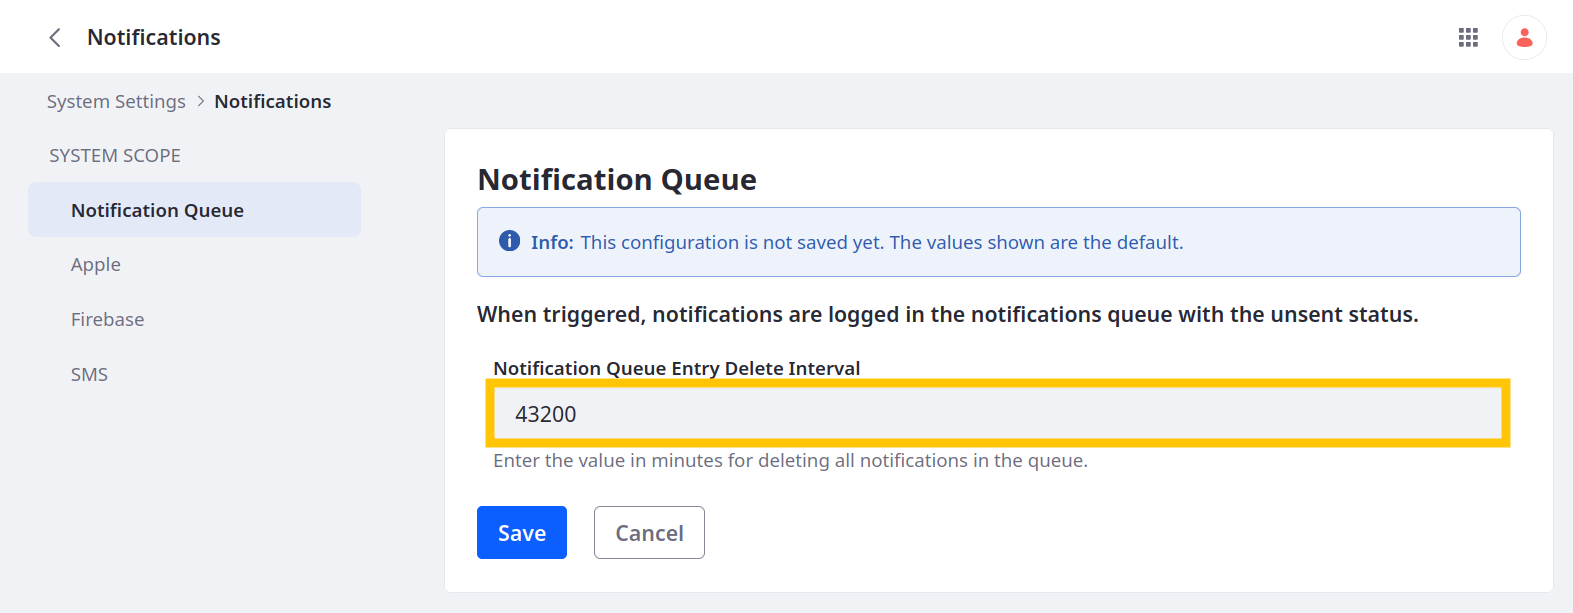 Under Notification Queue, enter the number of minutes between deletion operations.